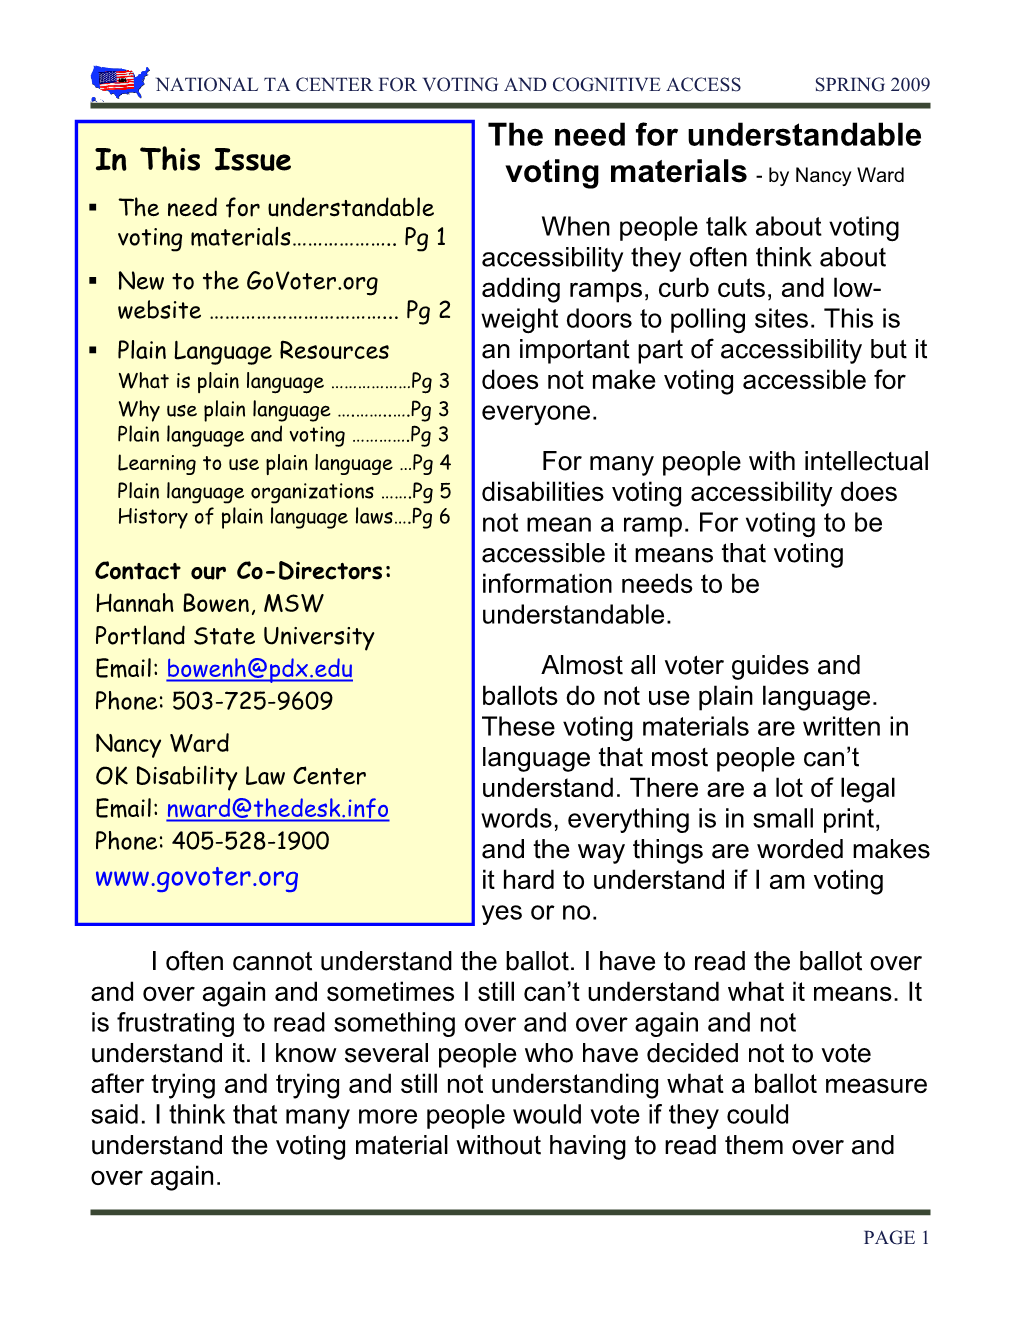 The Need for Understandable Voting Materials………………